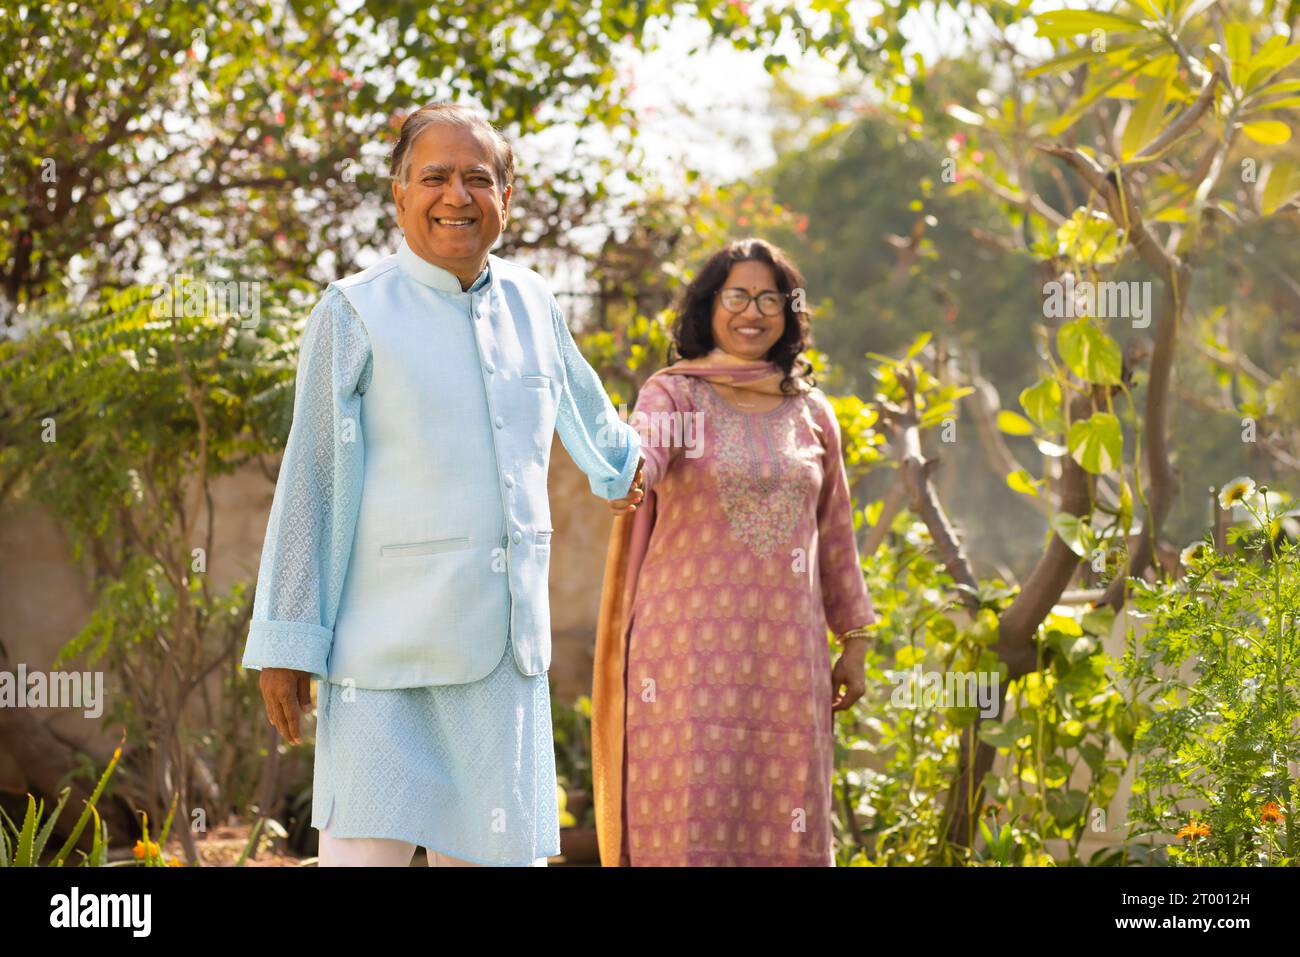 Portrait of Mature couple holding their hands while standing in garden Stock Photo